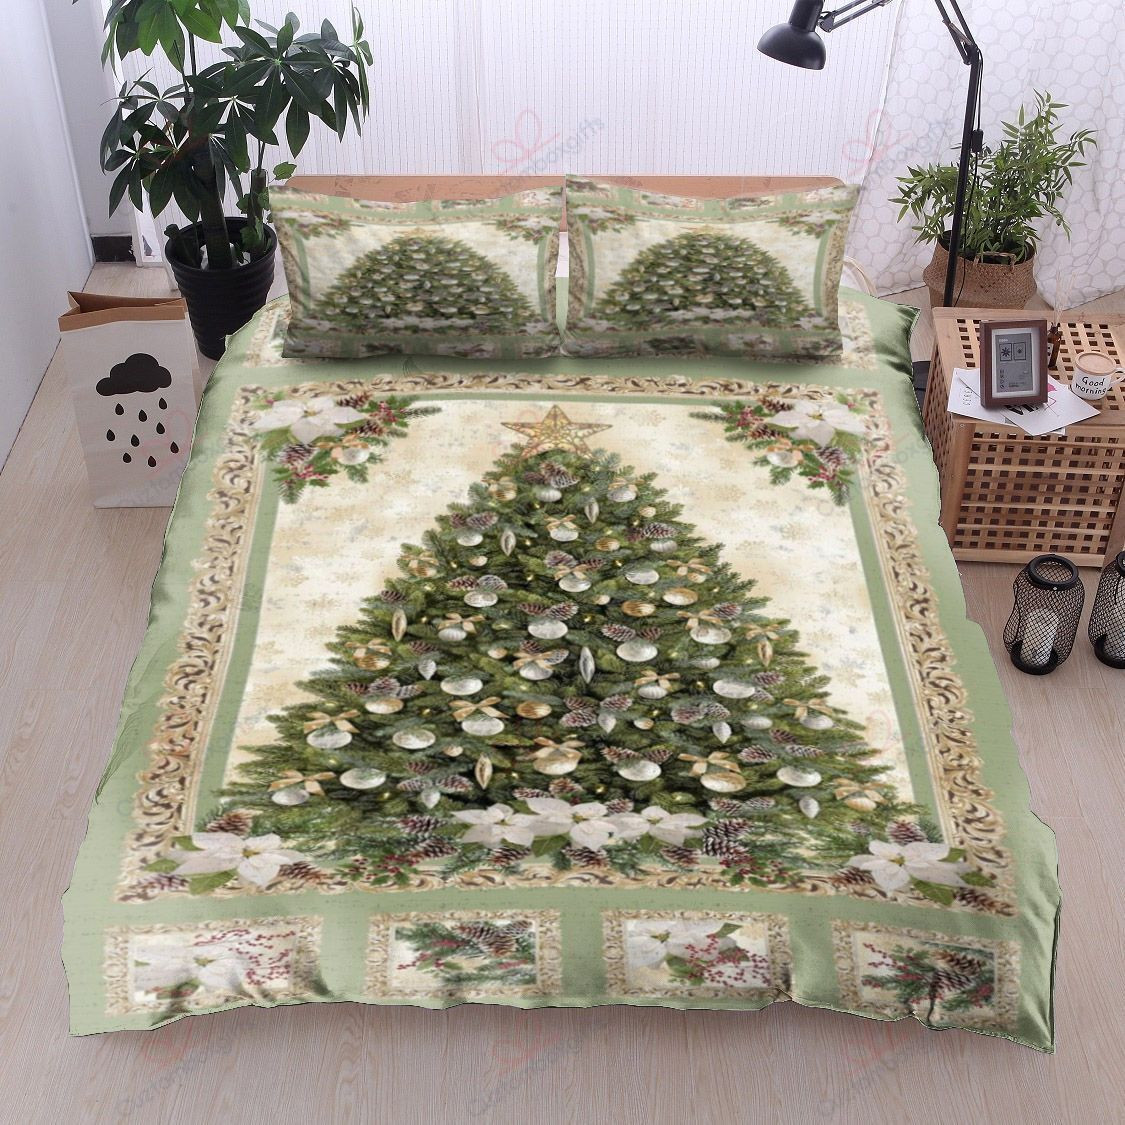 christmas tree bed sheets duvet cover bedding set ideal presents for holiday season j9x41